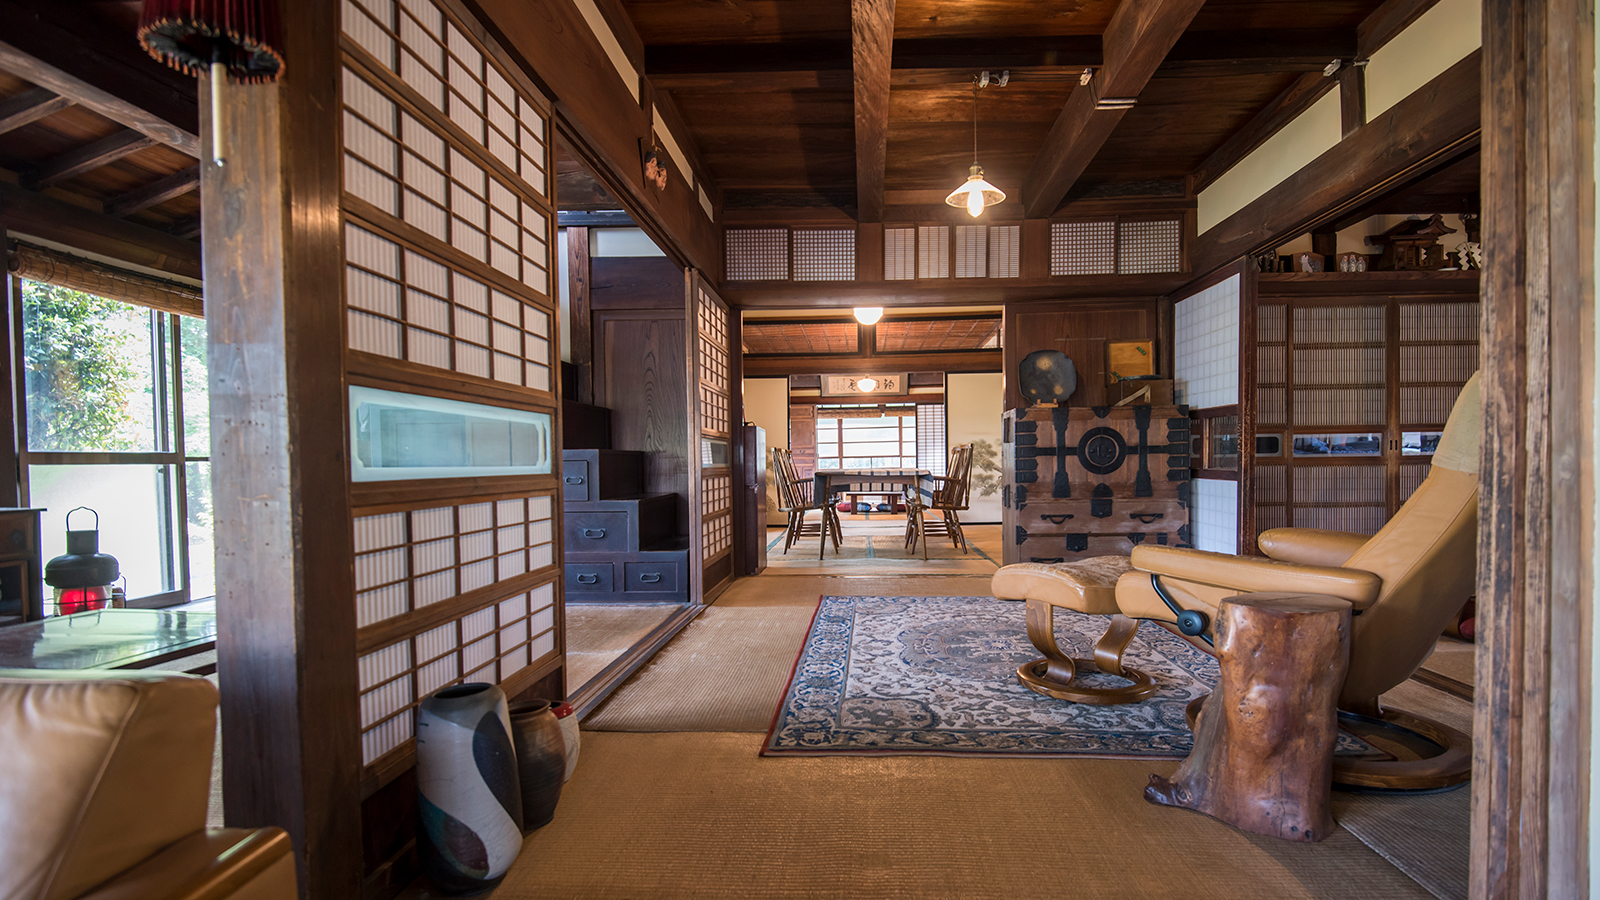 Life In Traditional Japanese Houses 12 Clever Design Secrets Of Homes In Japan Live Japan Travel Guide